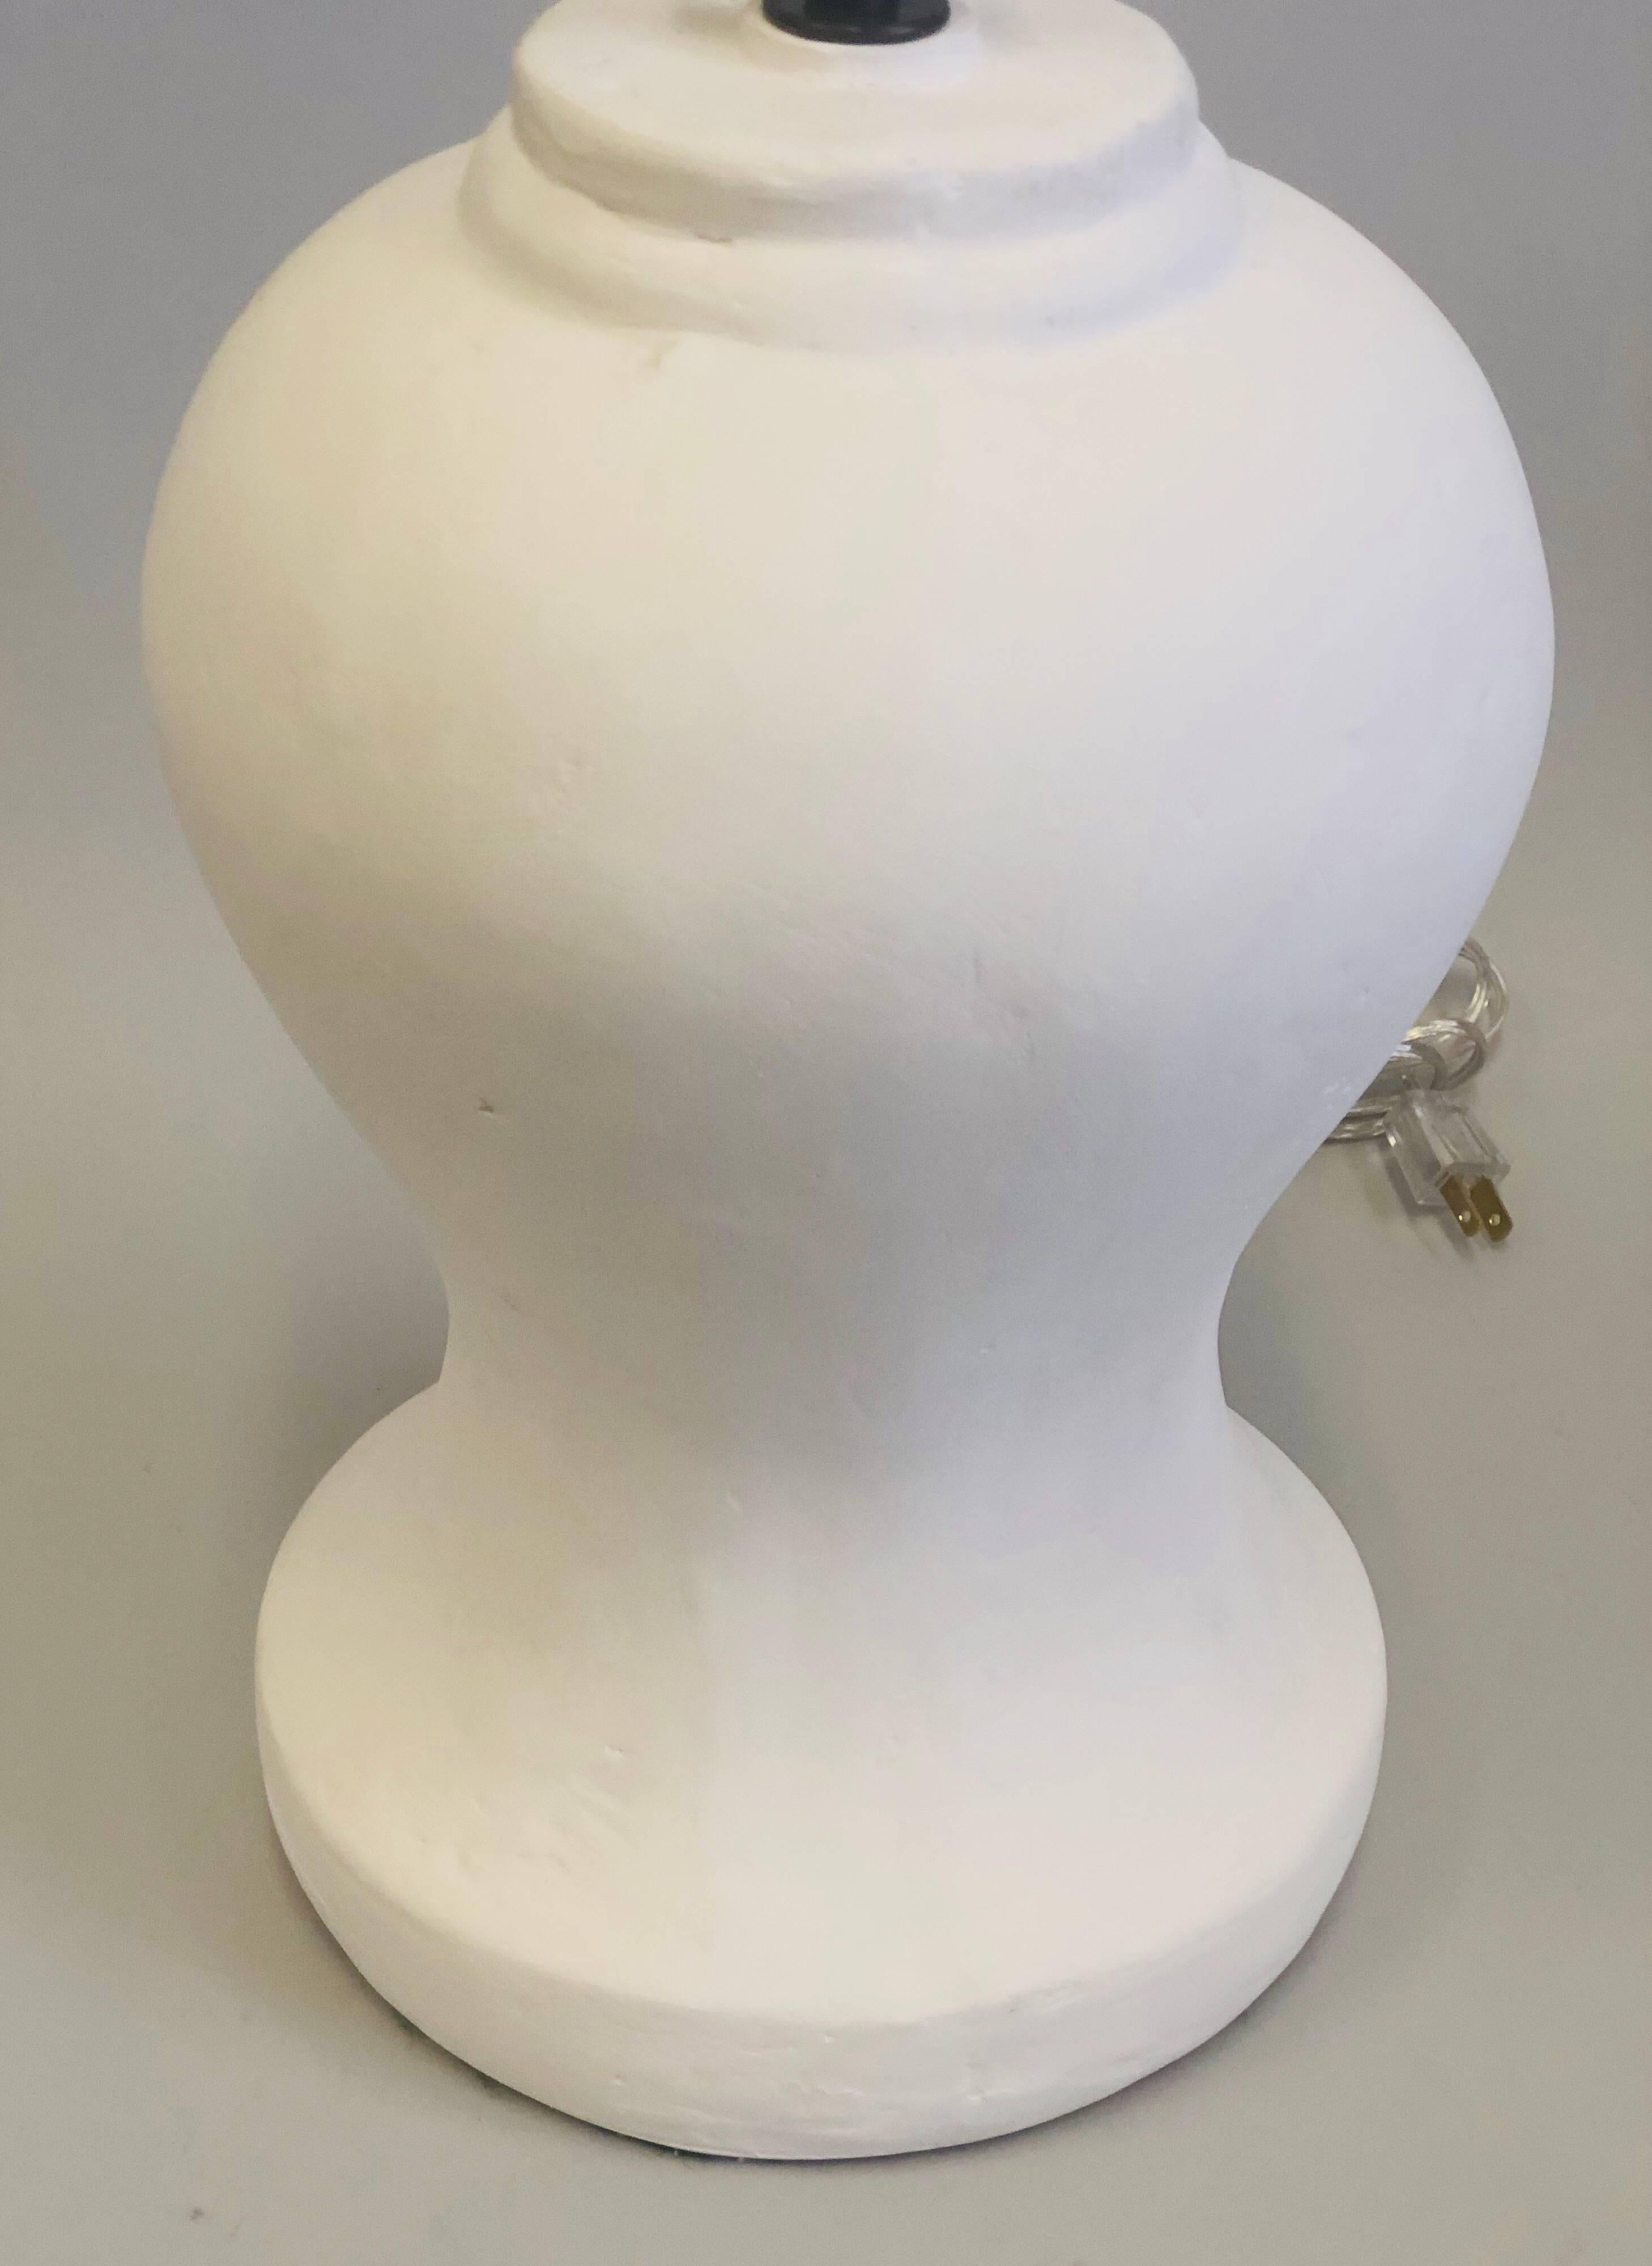 20th Century French Plaster Table Lamps Pair from a Model by Giacometti and Jean-Michel Frank For Sale